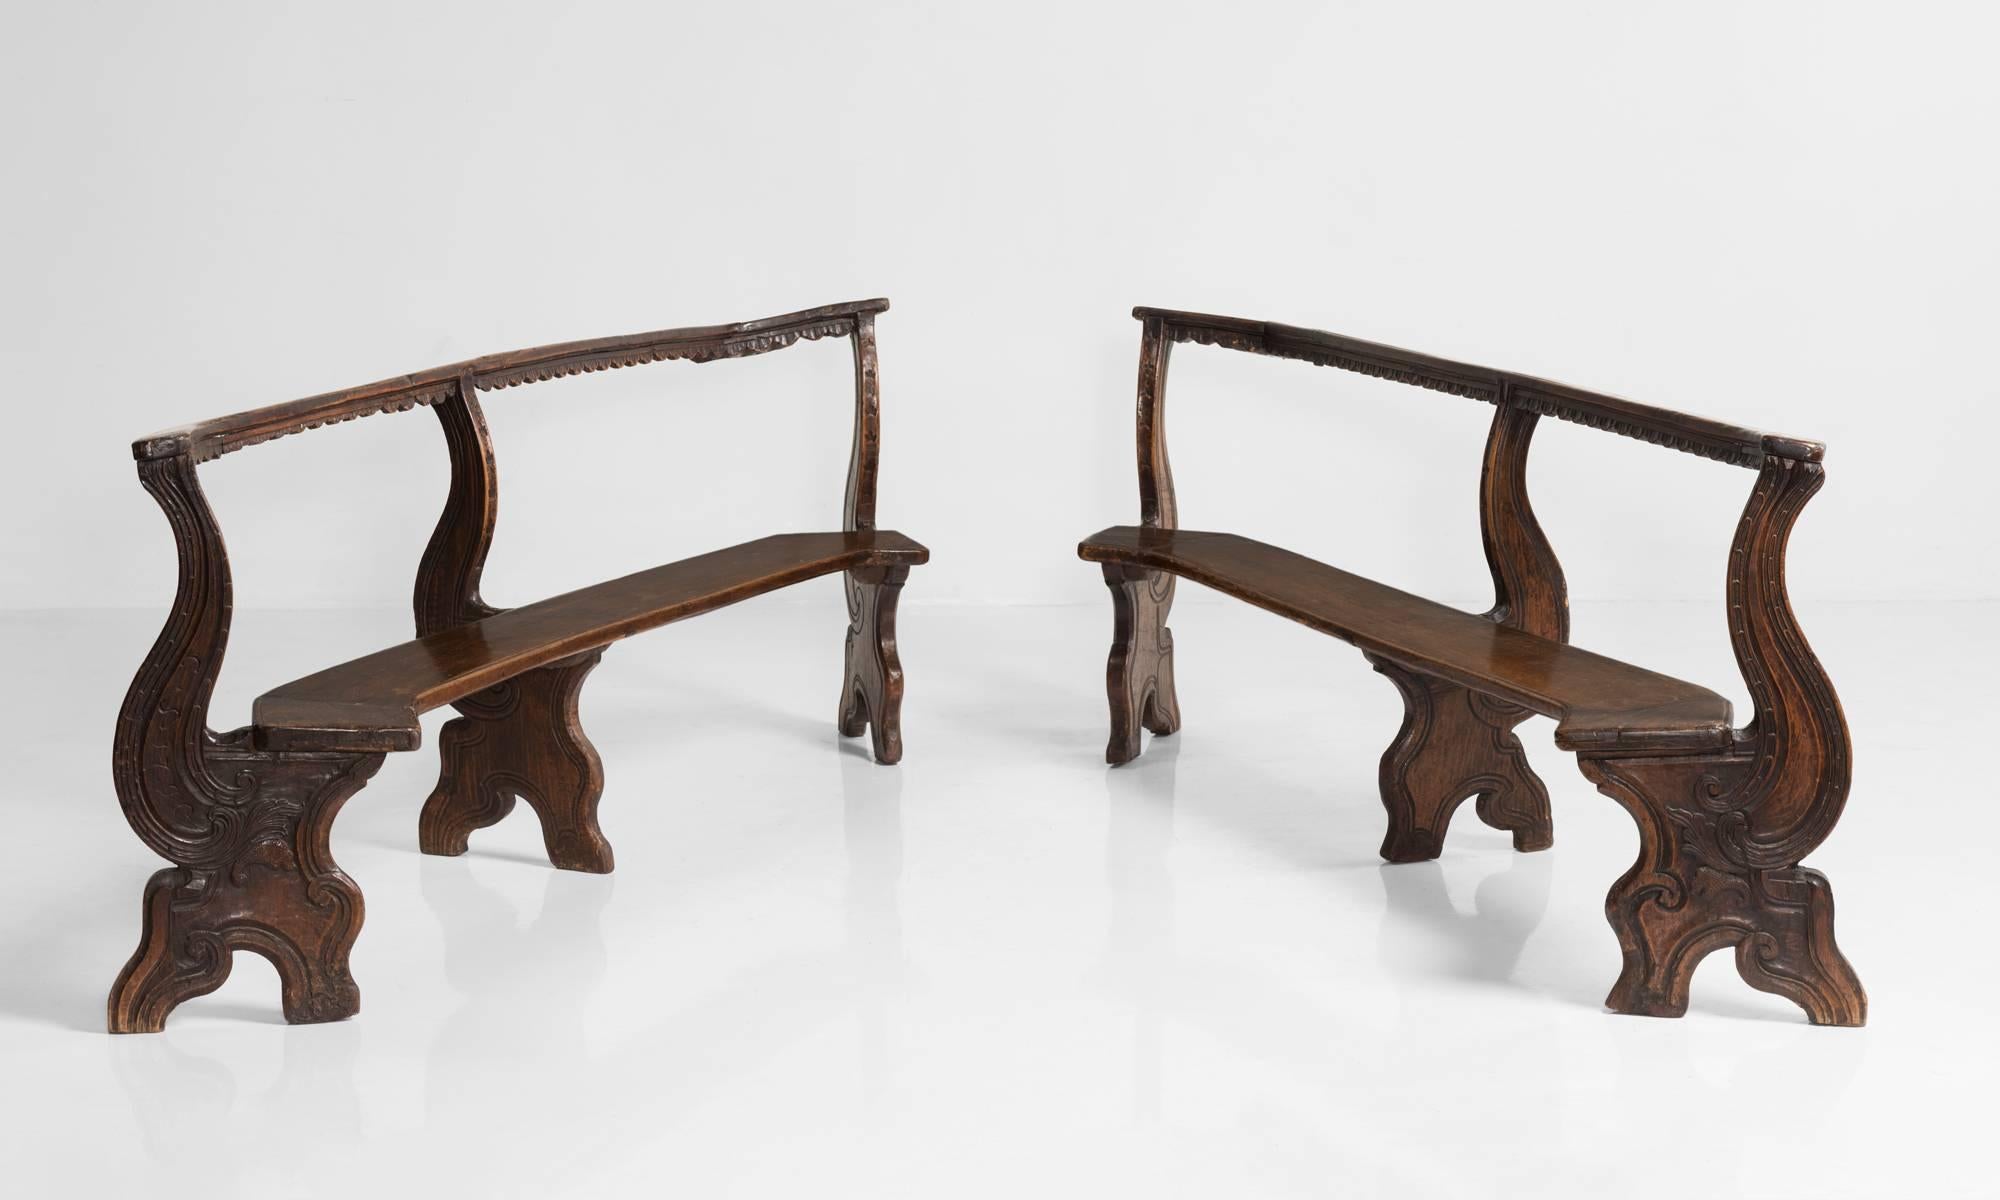 Curved Mahogany Bench, Italy, circa 1800.

Unique form with legs and back support in the shape of a horse motif.